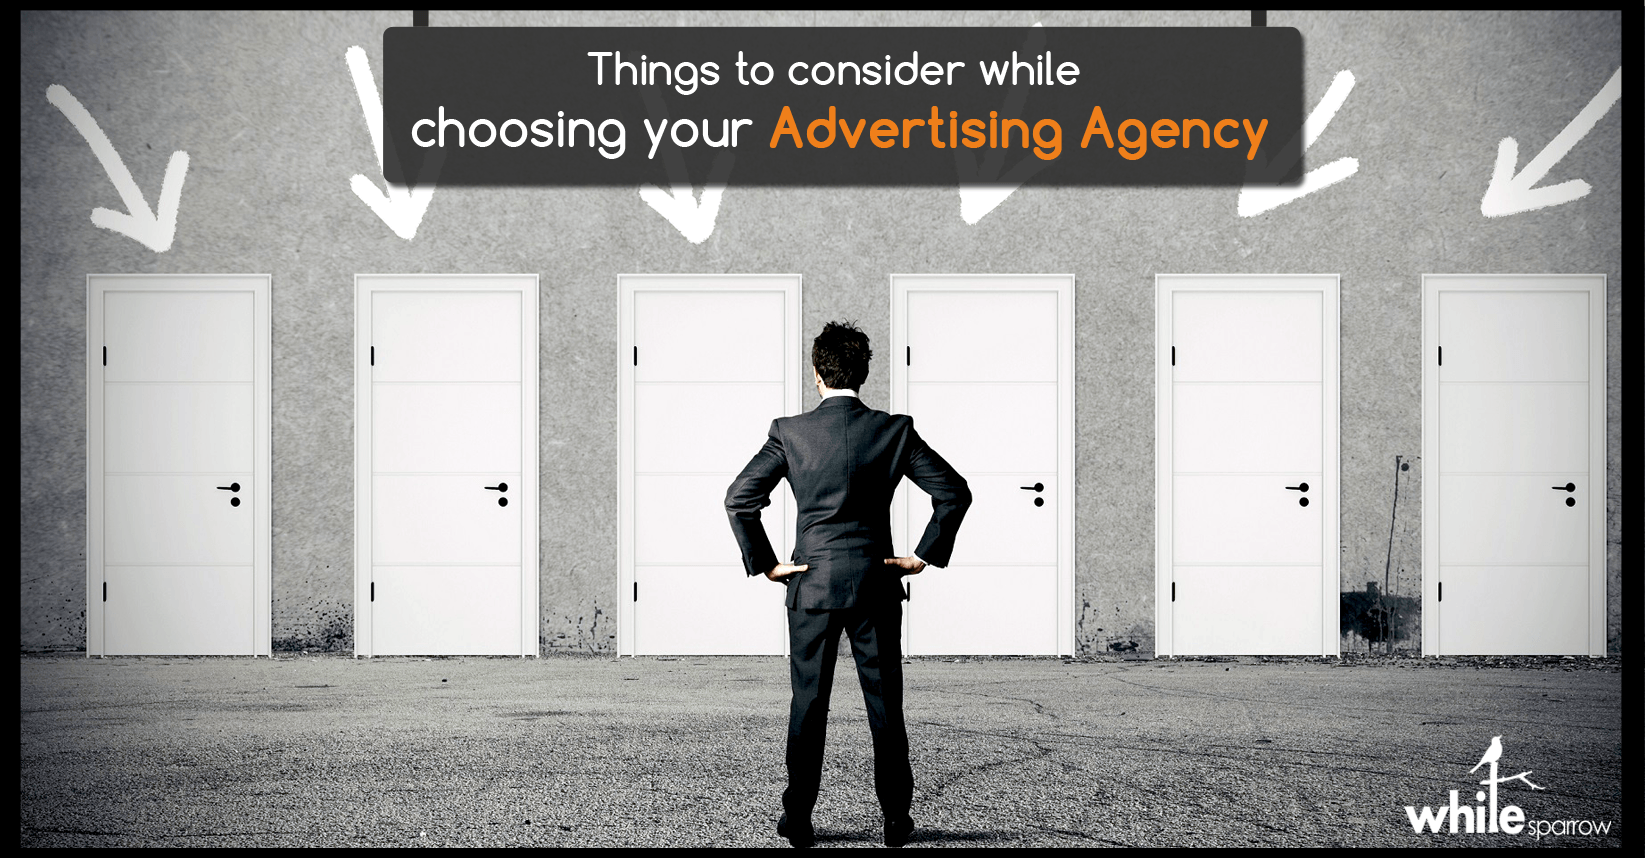 Things to consider while choosing your Advertising Agency